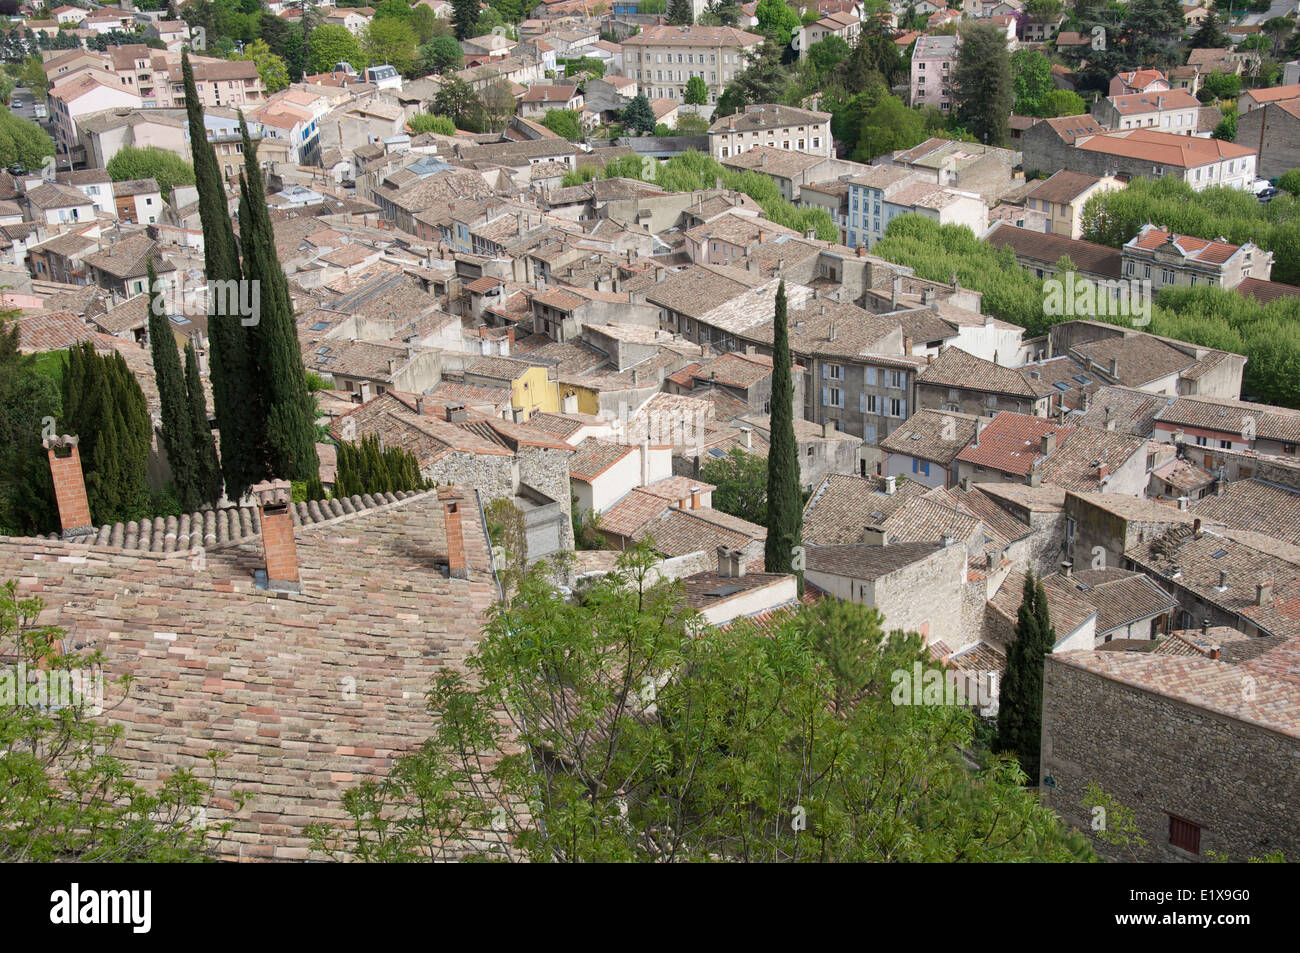 Overlooking the picturesque jumbled rooftops of the old historic French town of Crest, from a high viewpoint on the castle walls. La Drôme in France. Stock Photo